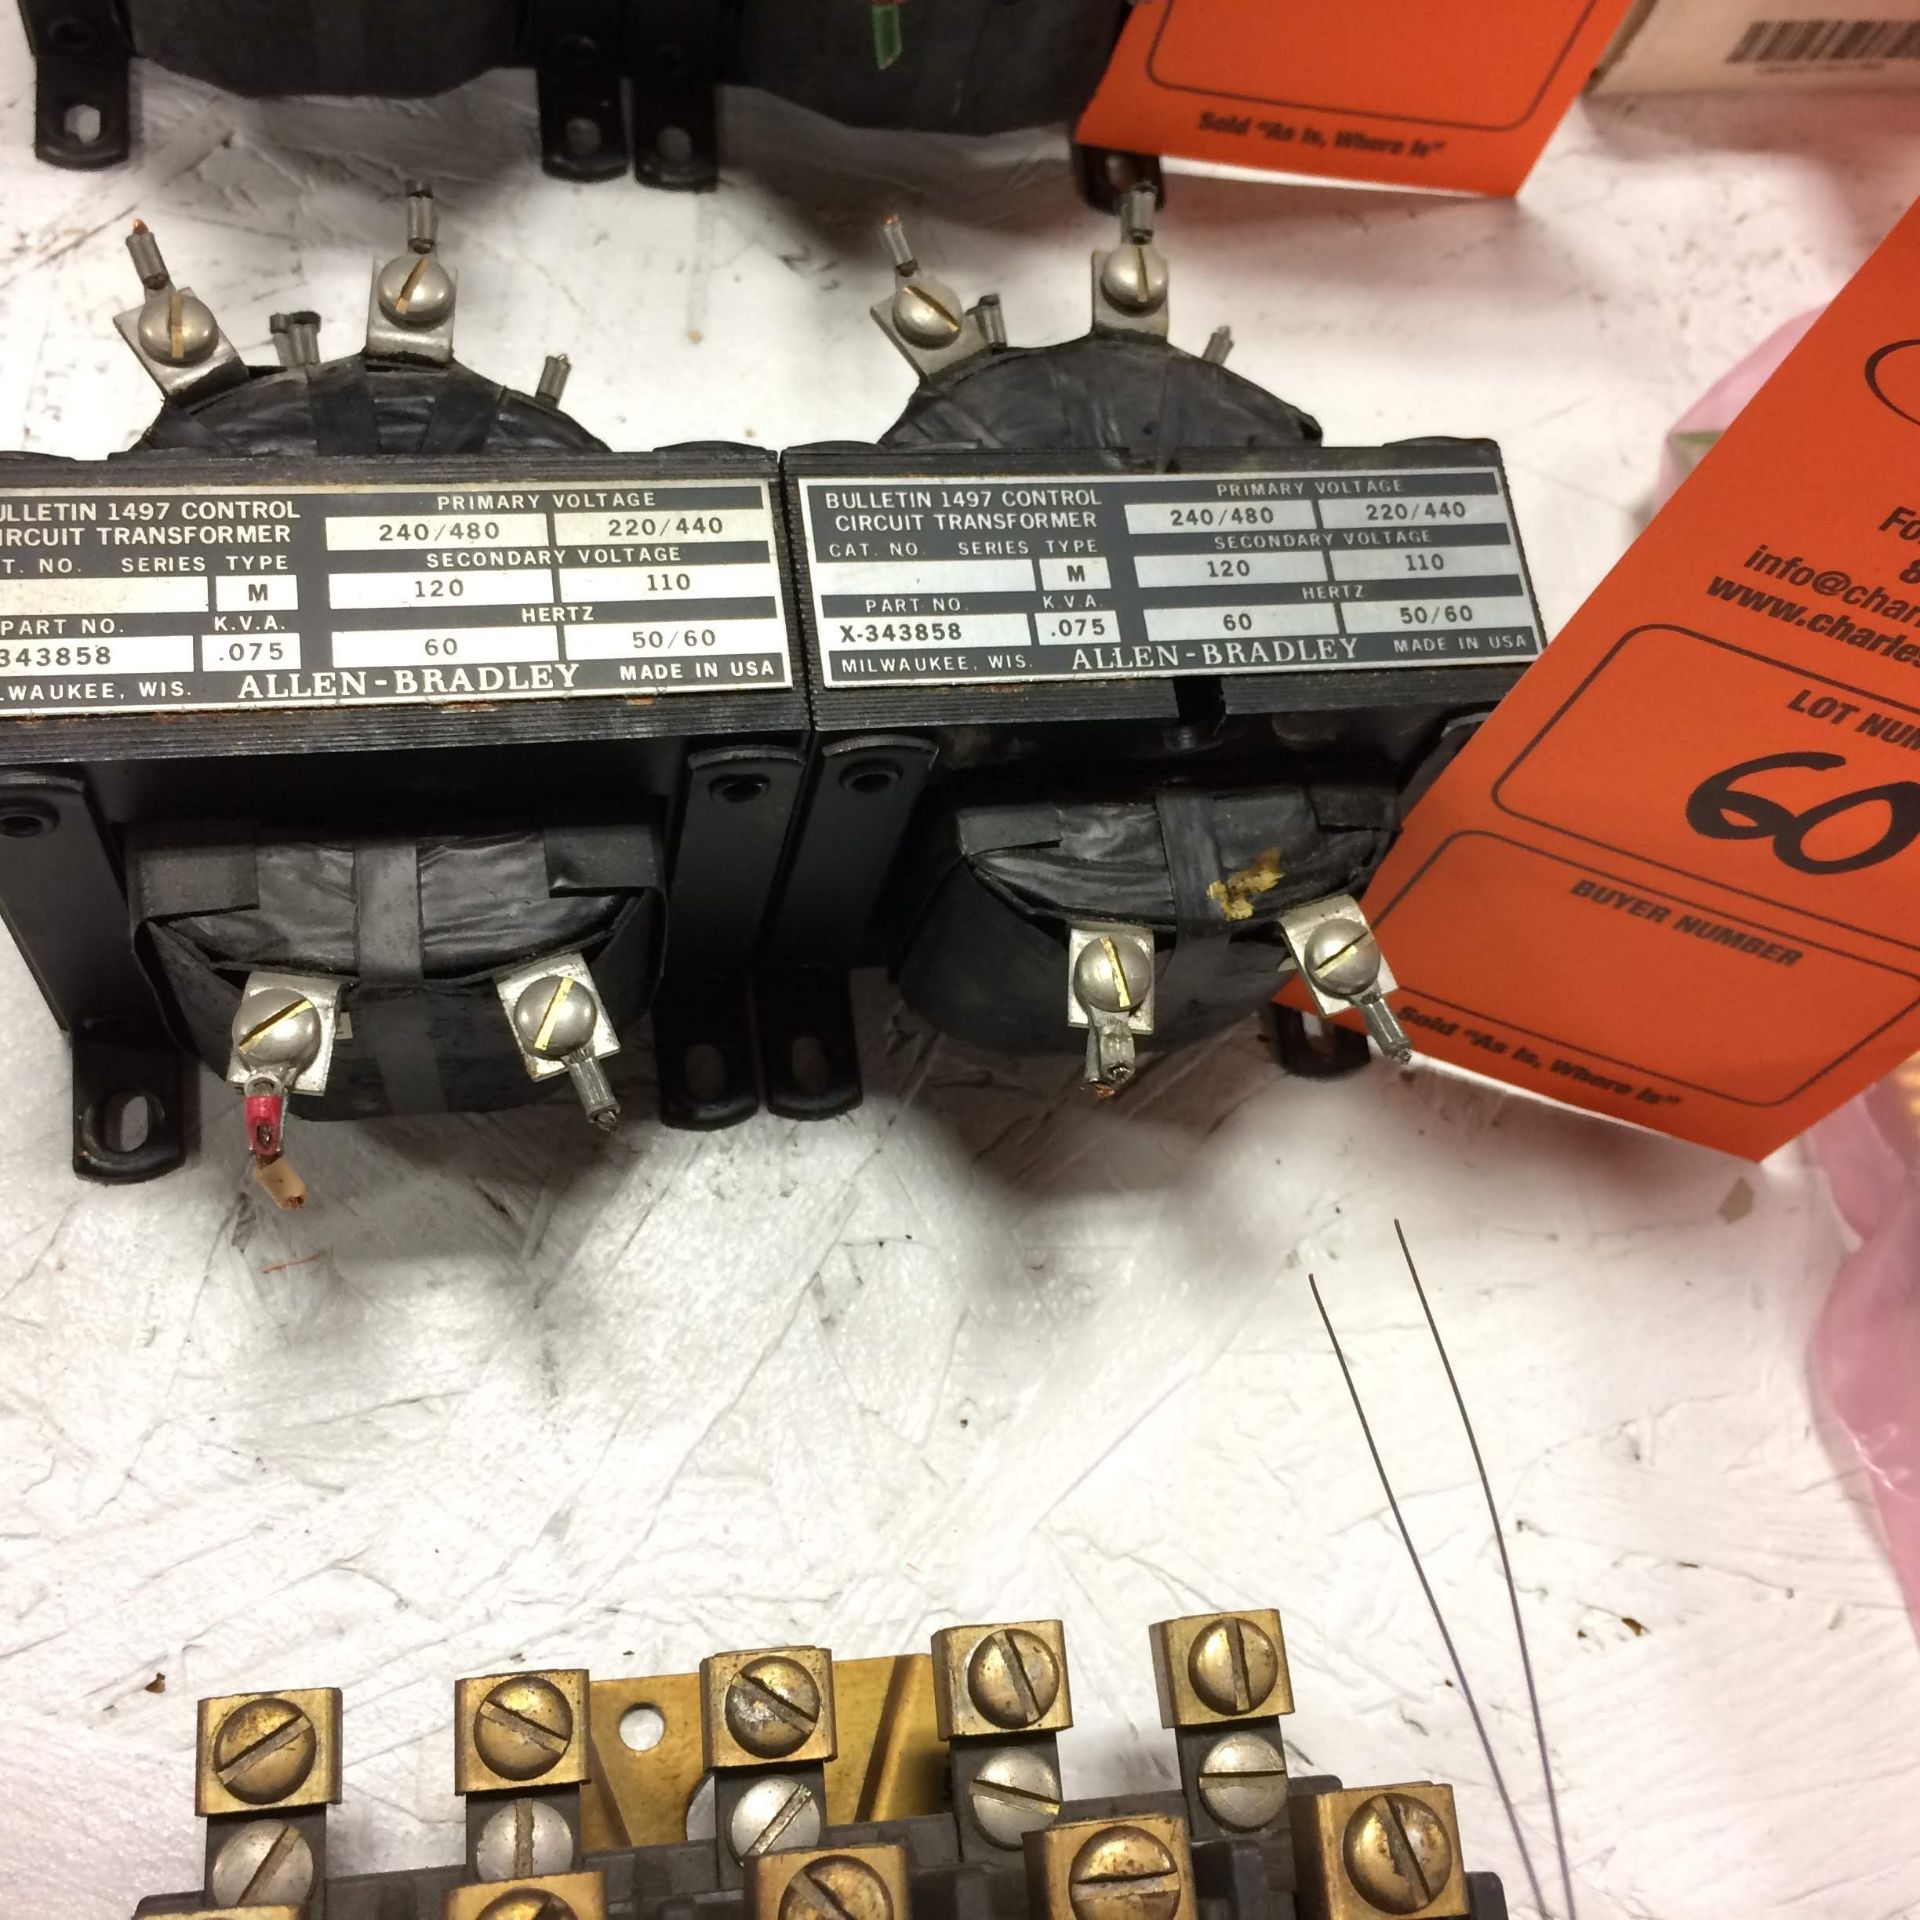 (2) X-343858 ALLEN BRADLEY TRANSFORMERS USED. Pickup your lot(s) for free! Shipping is available for - Image 2 of 5